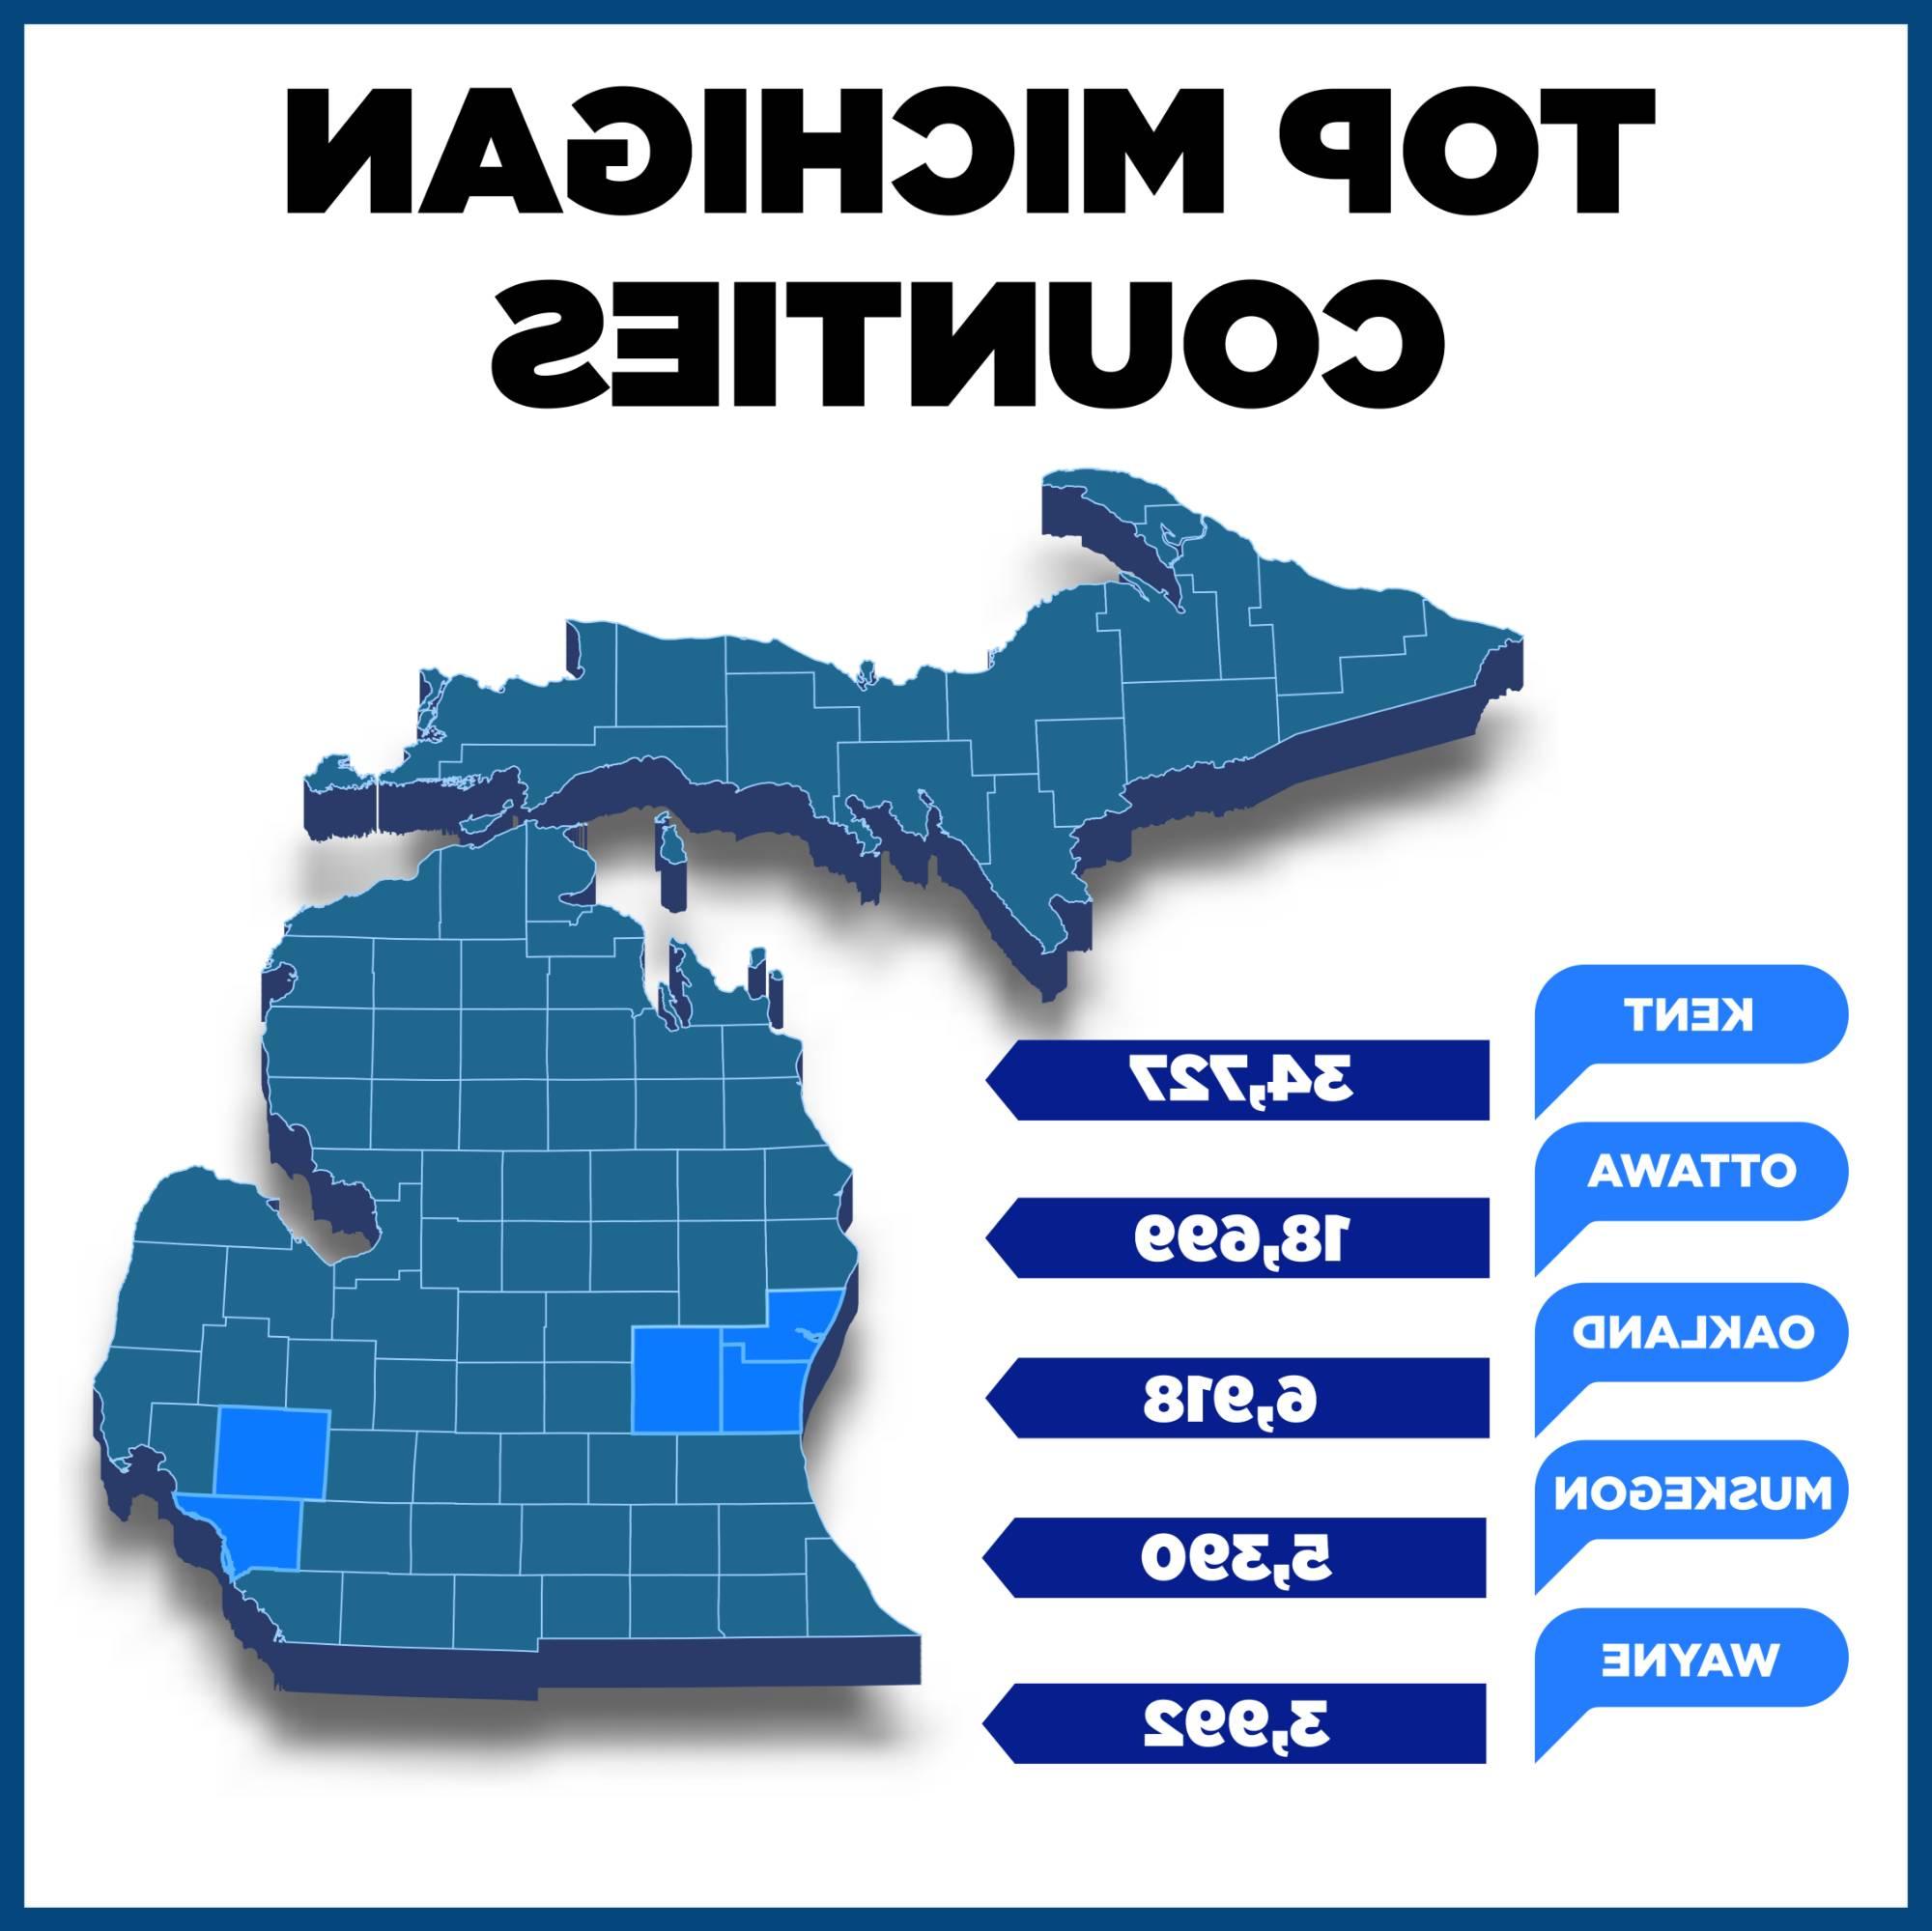 A blue map of Michigan displays the top 5 counties home to GVSU Alumni, which includes; Kent County (34,727), Ottawa County (18,699), Oakland County (6,918), Muskegon County (5,390), and Wayne County (3,992).